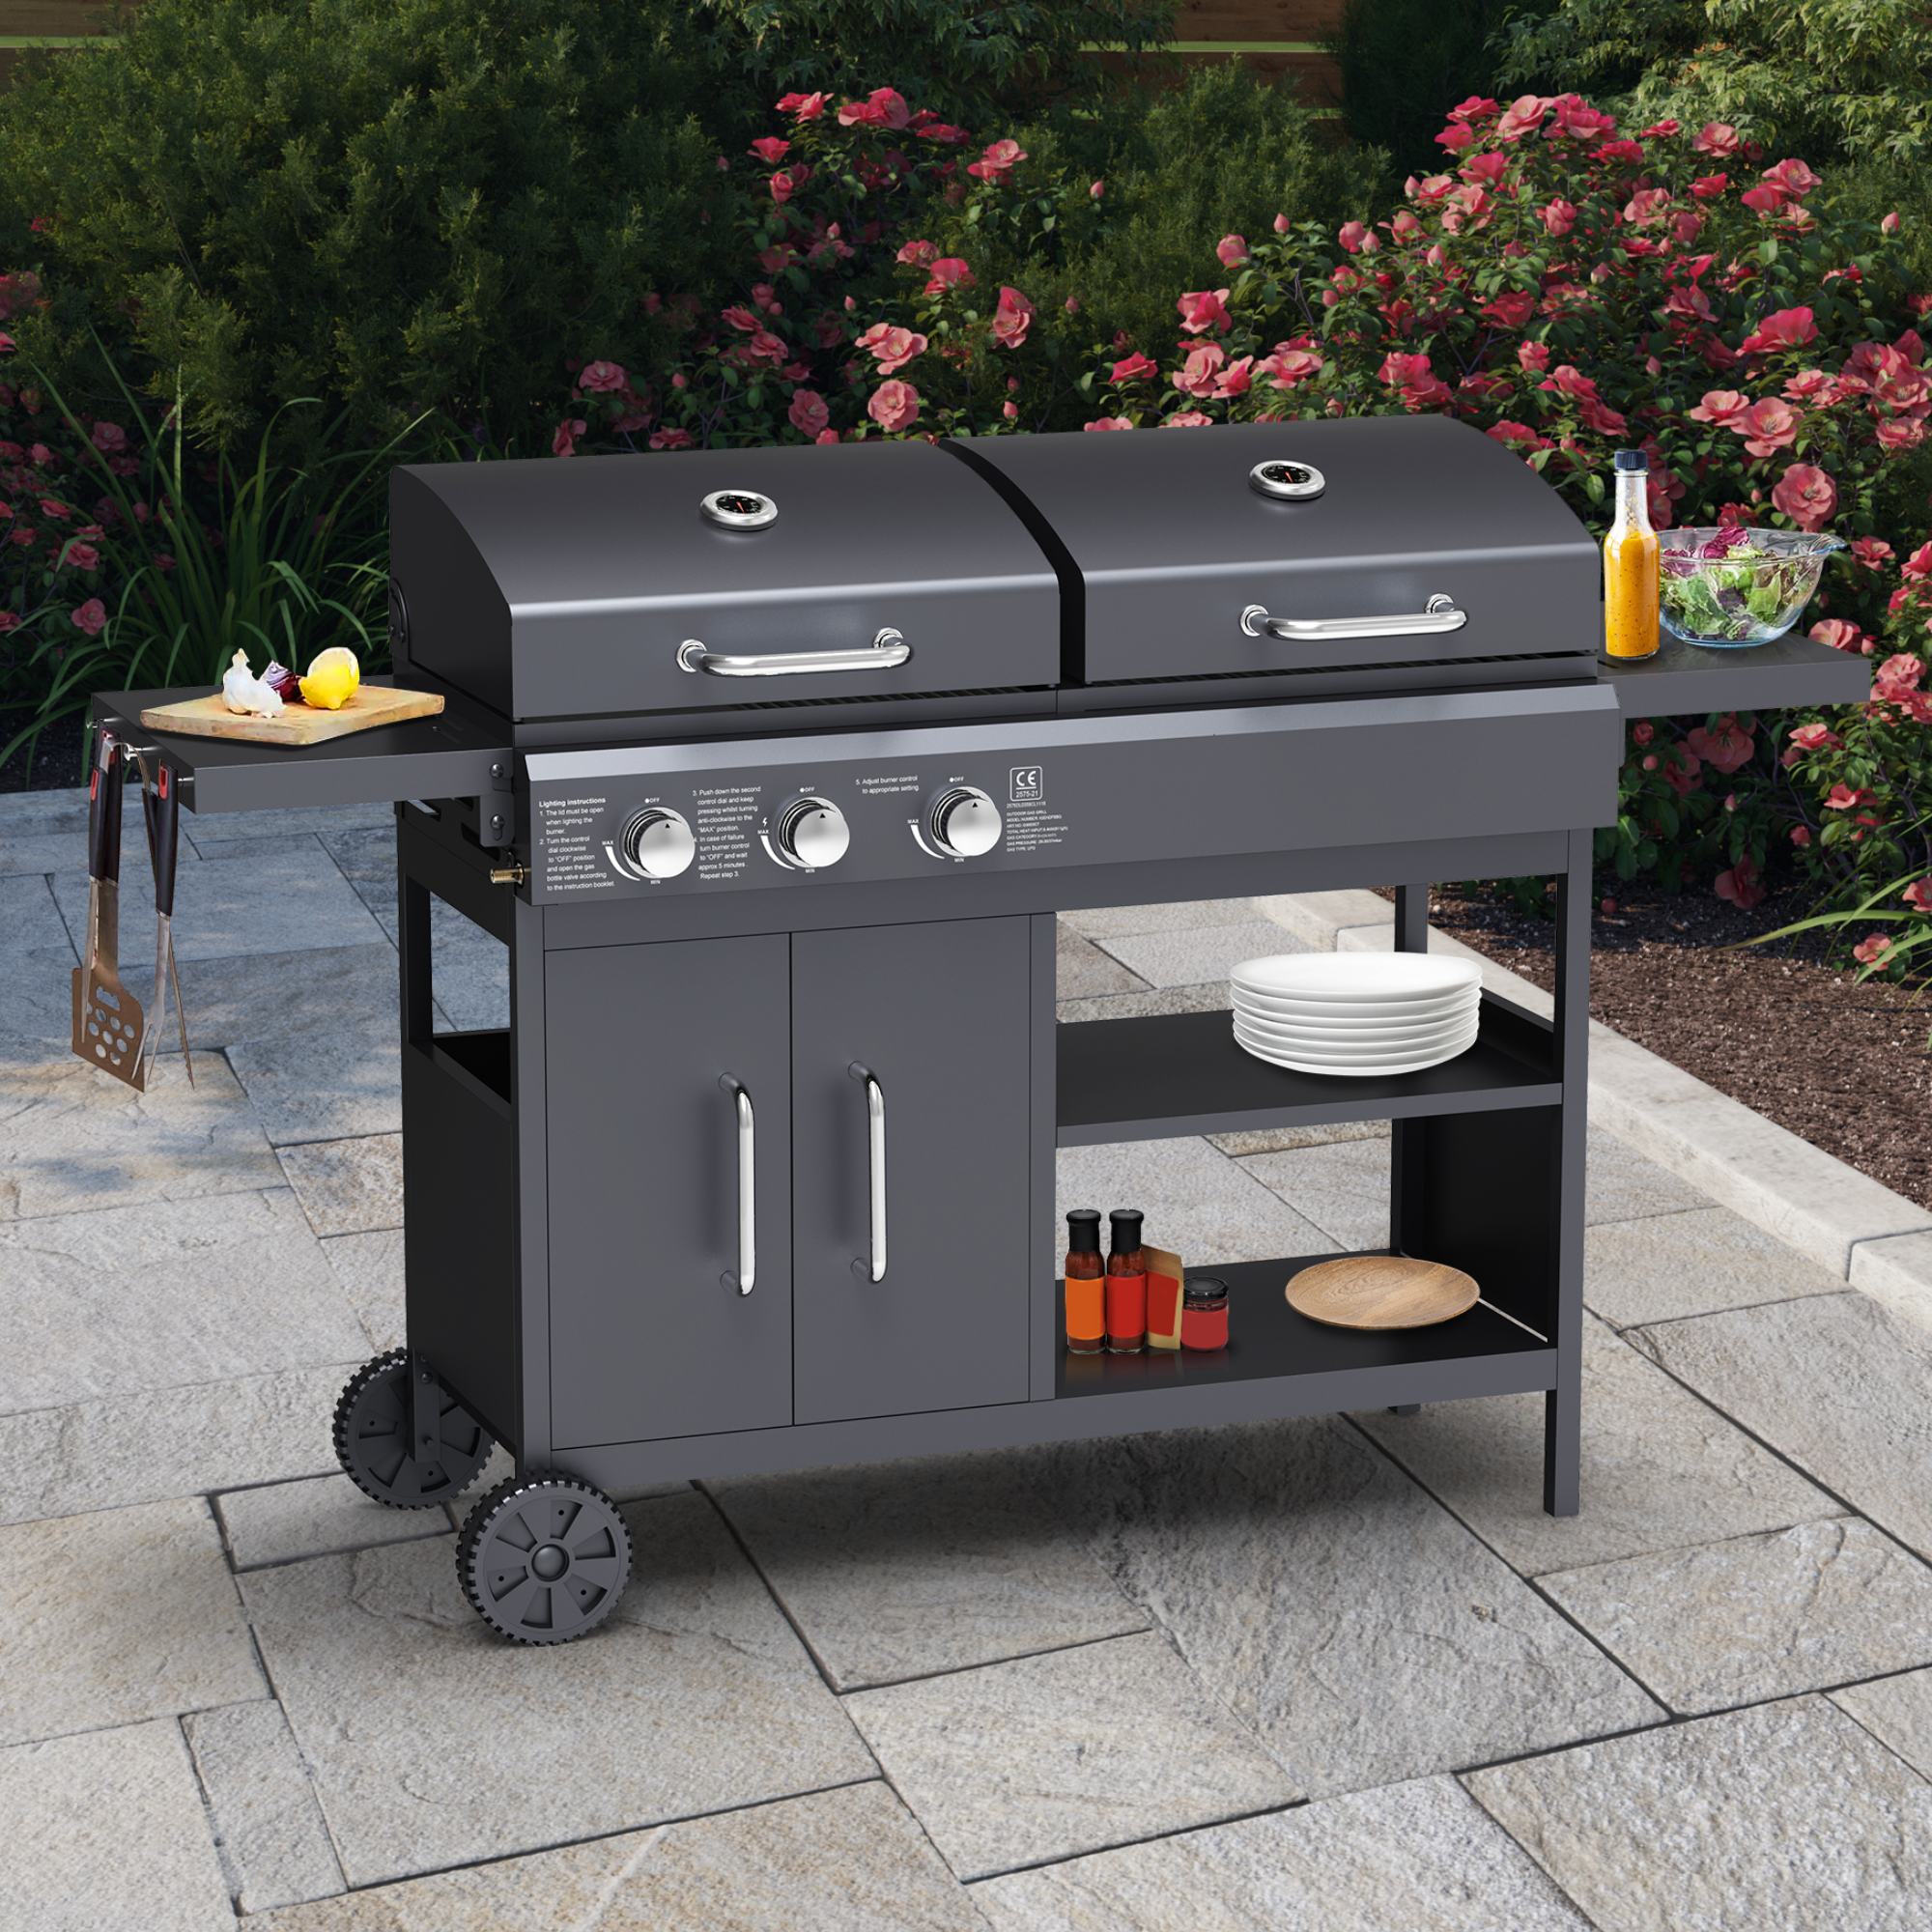 Billyoh Montana Black Dual Fuel Gas And Charcoal Hybrid Bbq With Side Tables Includes Cover Regulator Dual Fuel Gas And Charcoal Bbq Black